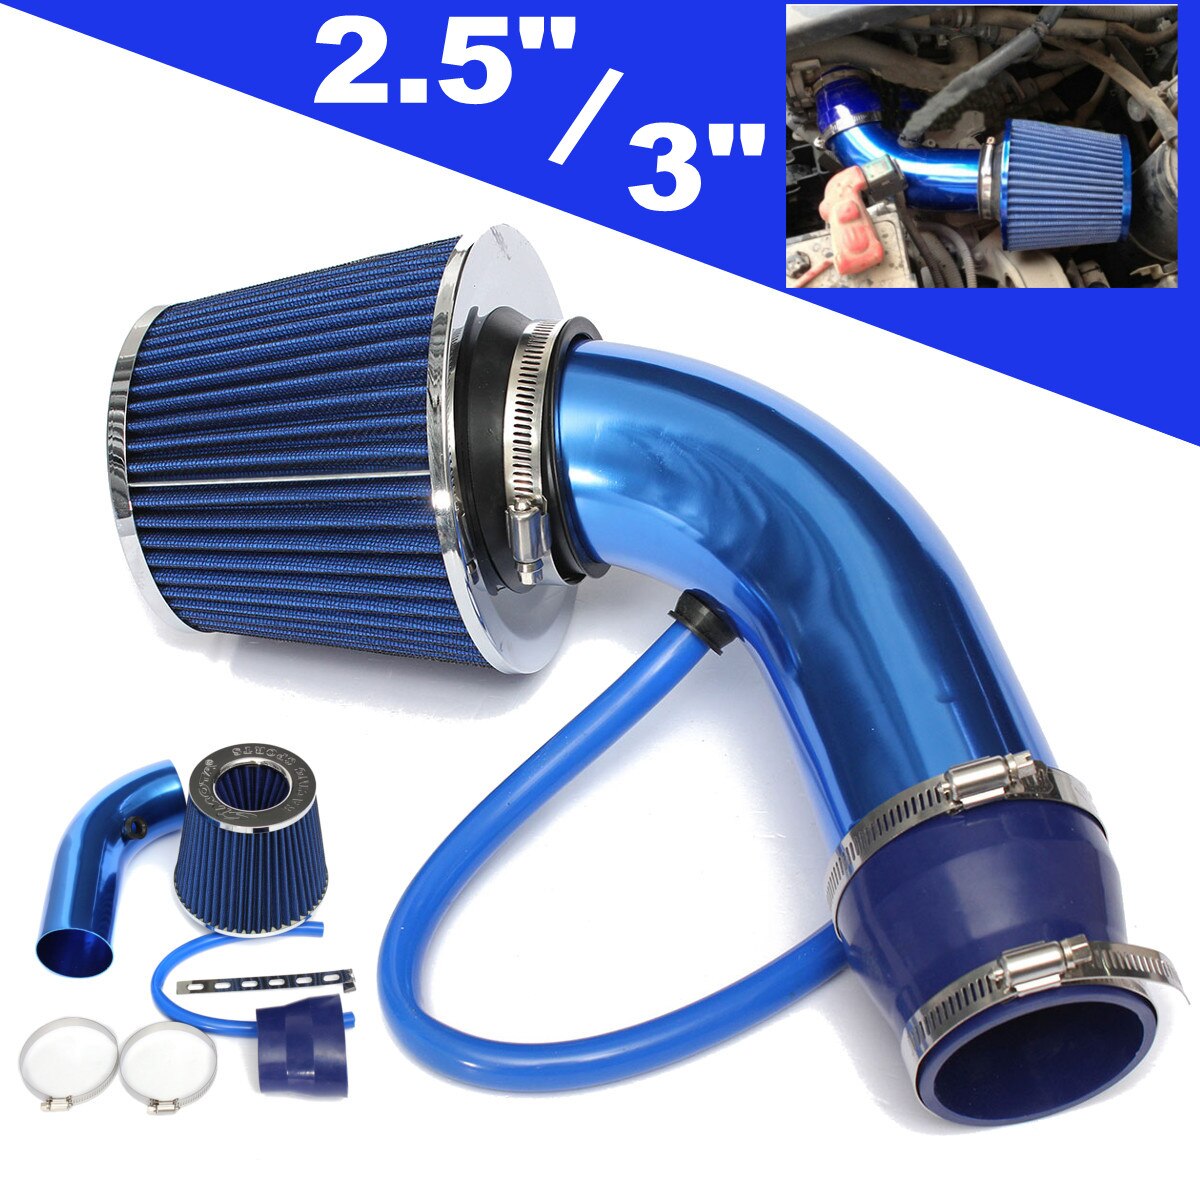 76 Mm 3 Inch Universele Auto Aluminium Luchtaanzuigbuis Kit + Luchtfilter Duct Tube Kit Luchtfilter Prestaties cold Air Intake Kit